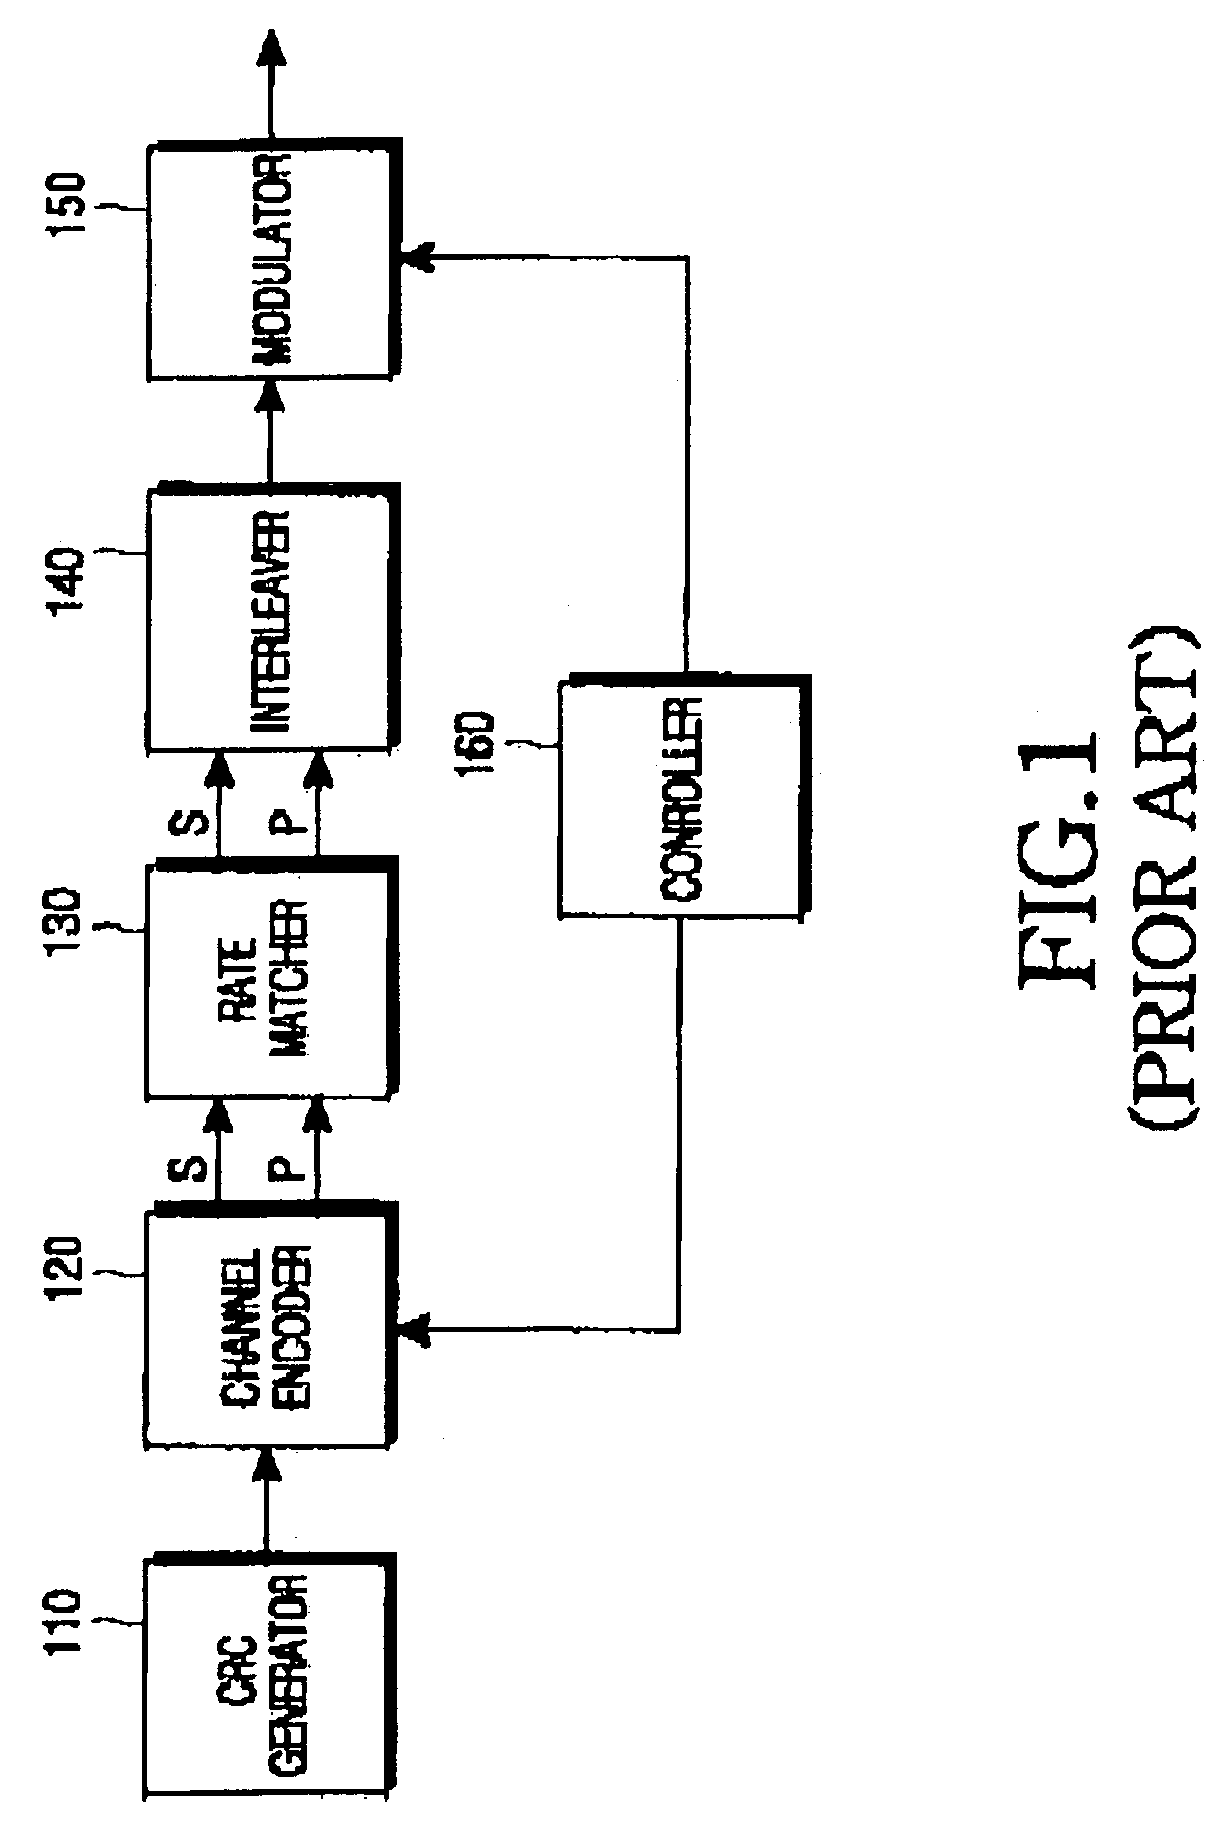 Interleaving apparatus and method for symbol mapping in an HSDPA mobile communication system